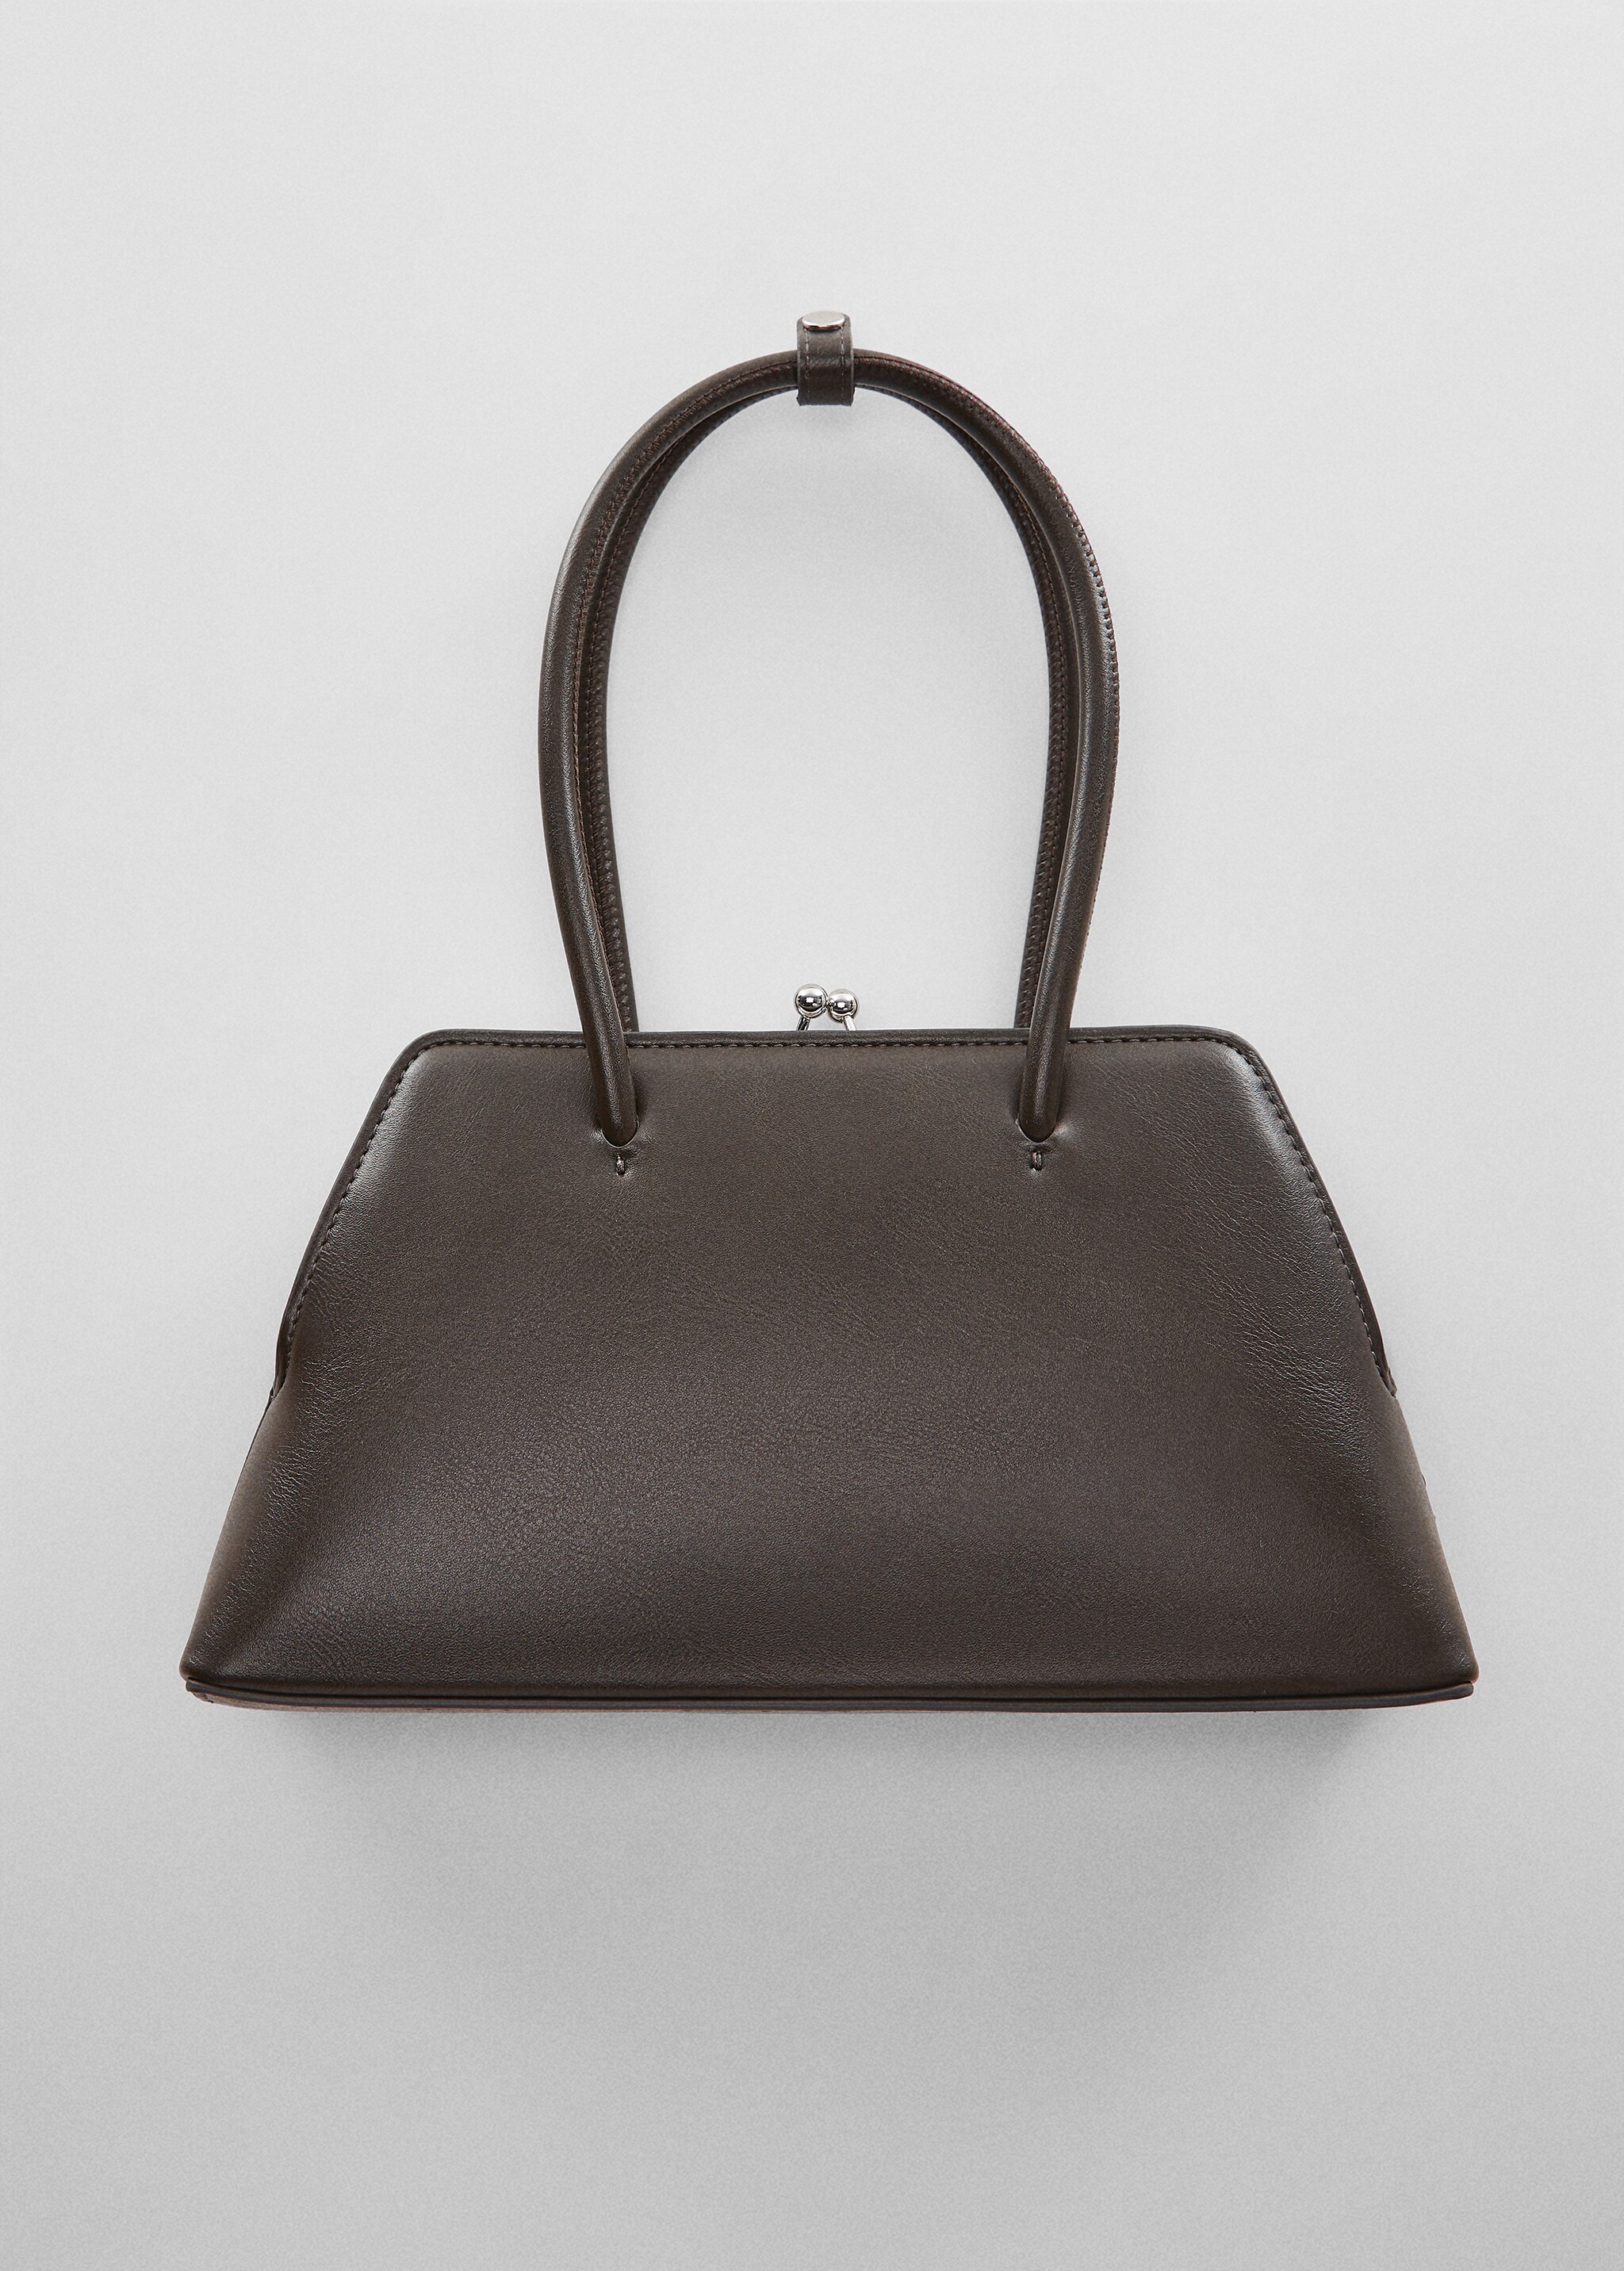 Double strap bag - Details of the article 5